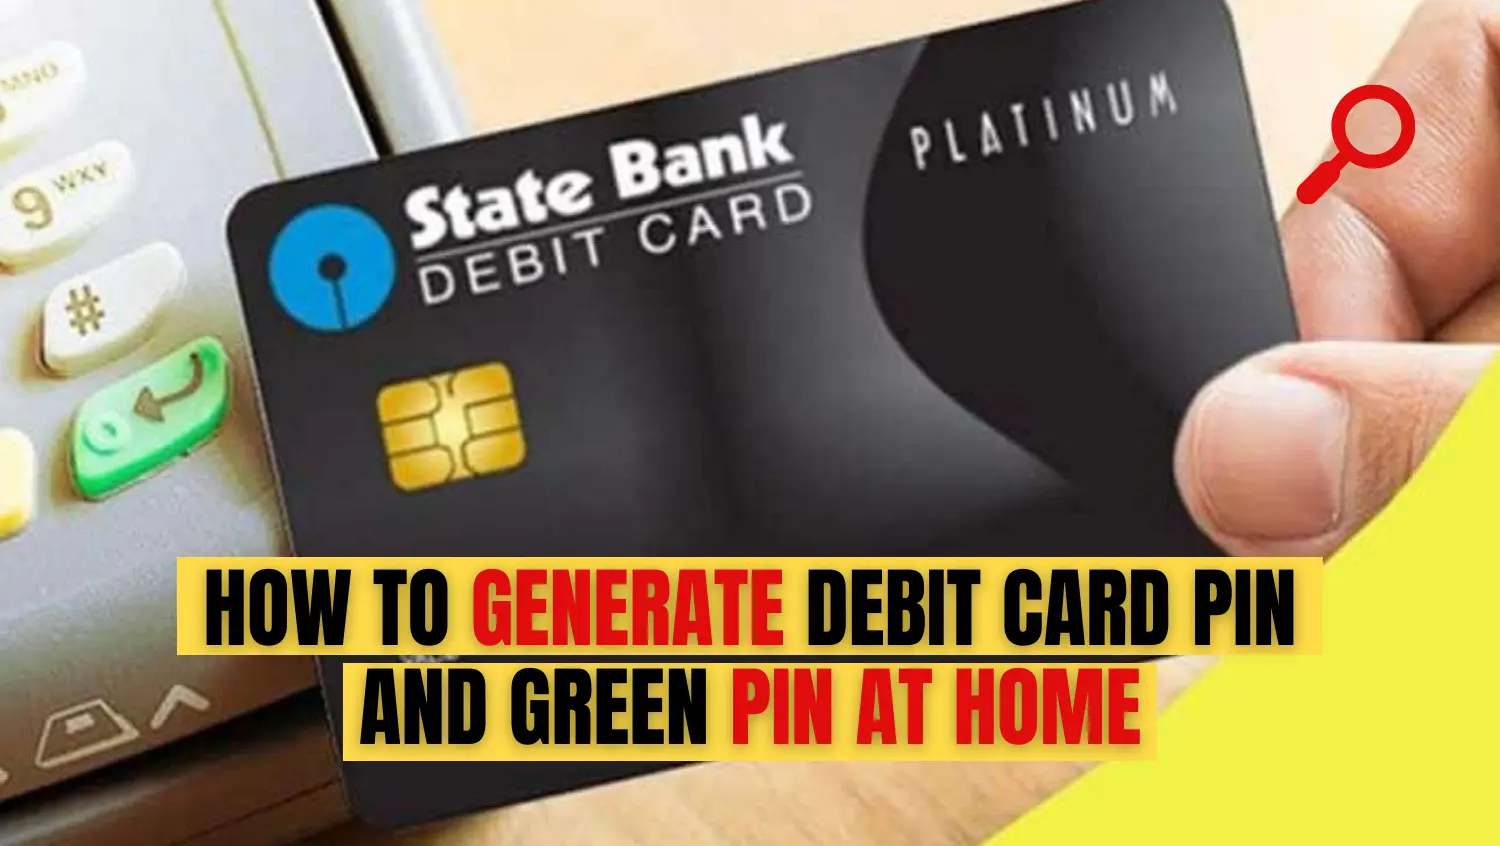 How to generate Debit Card PIN and Green PIN at home